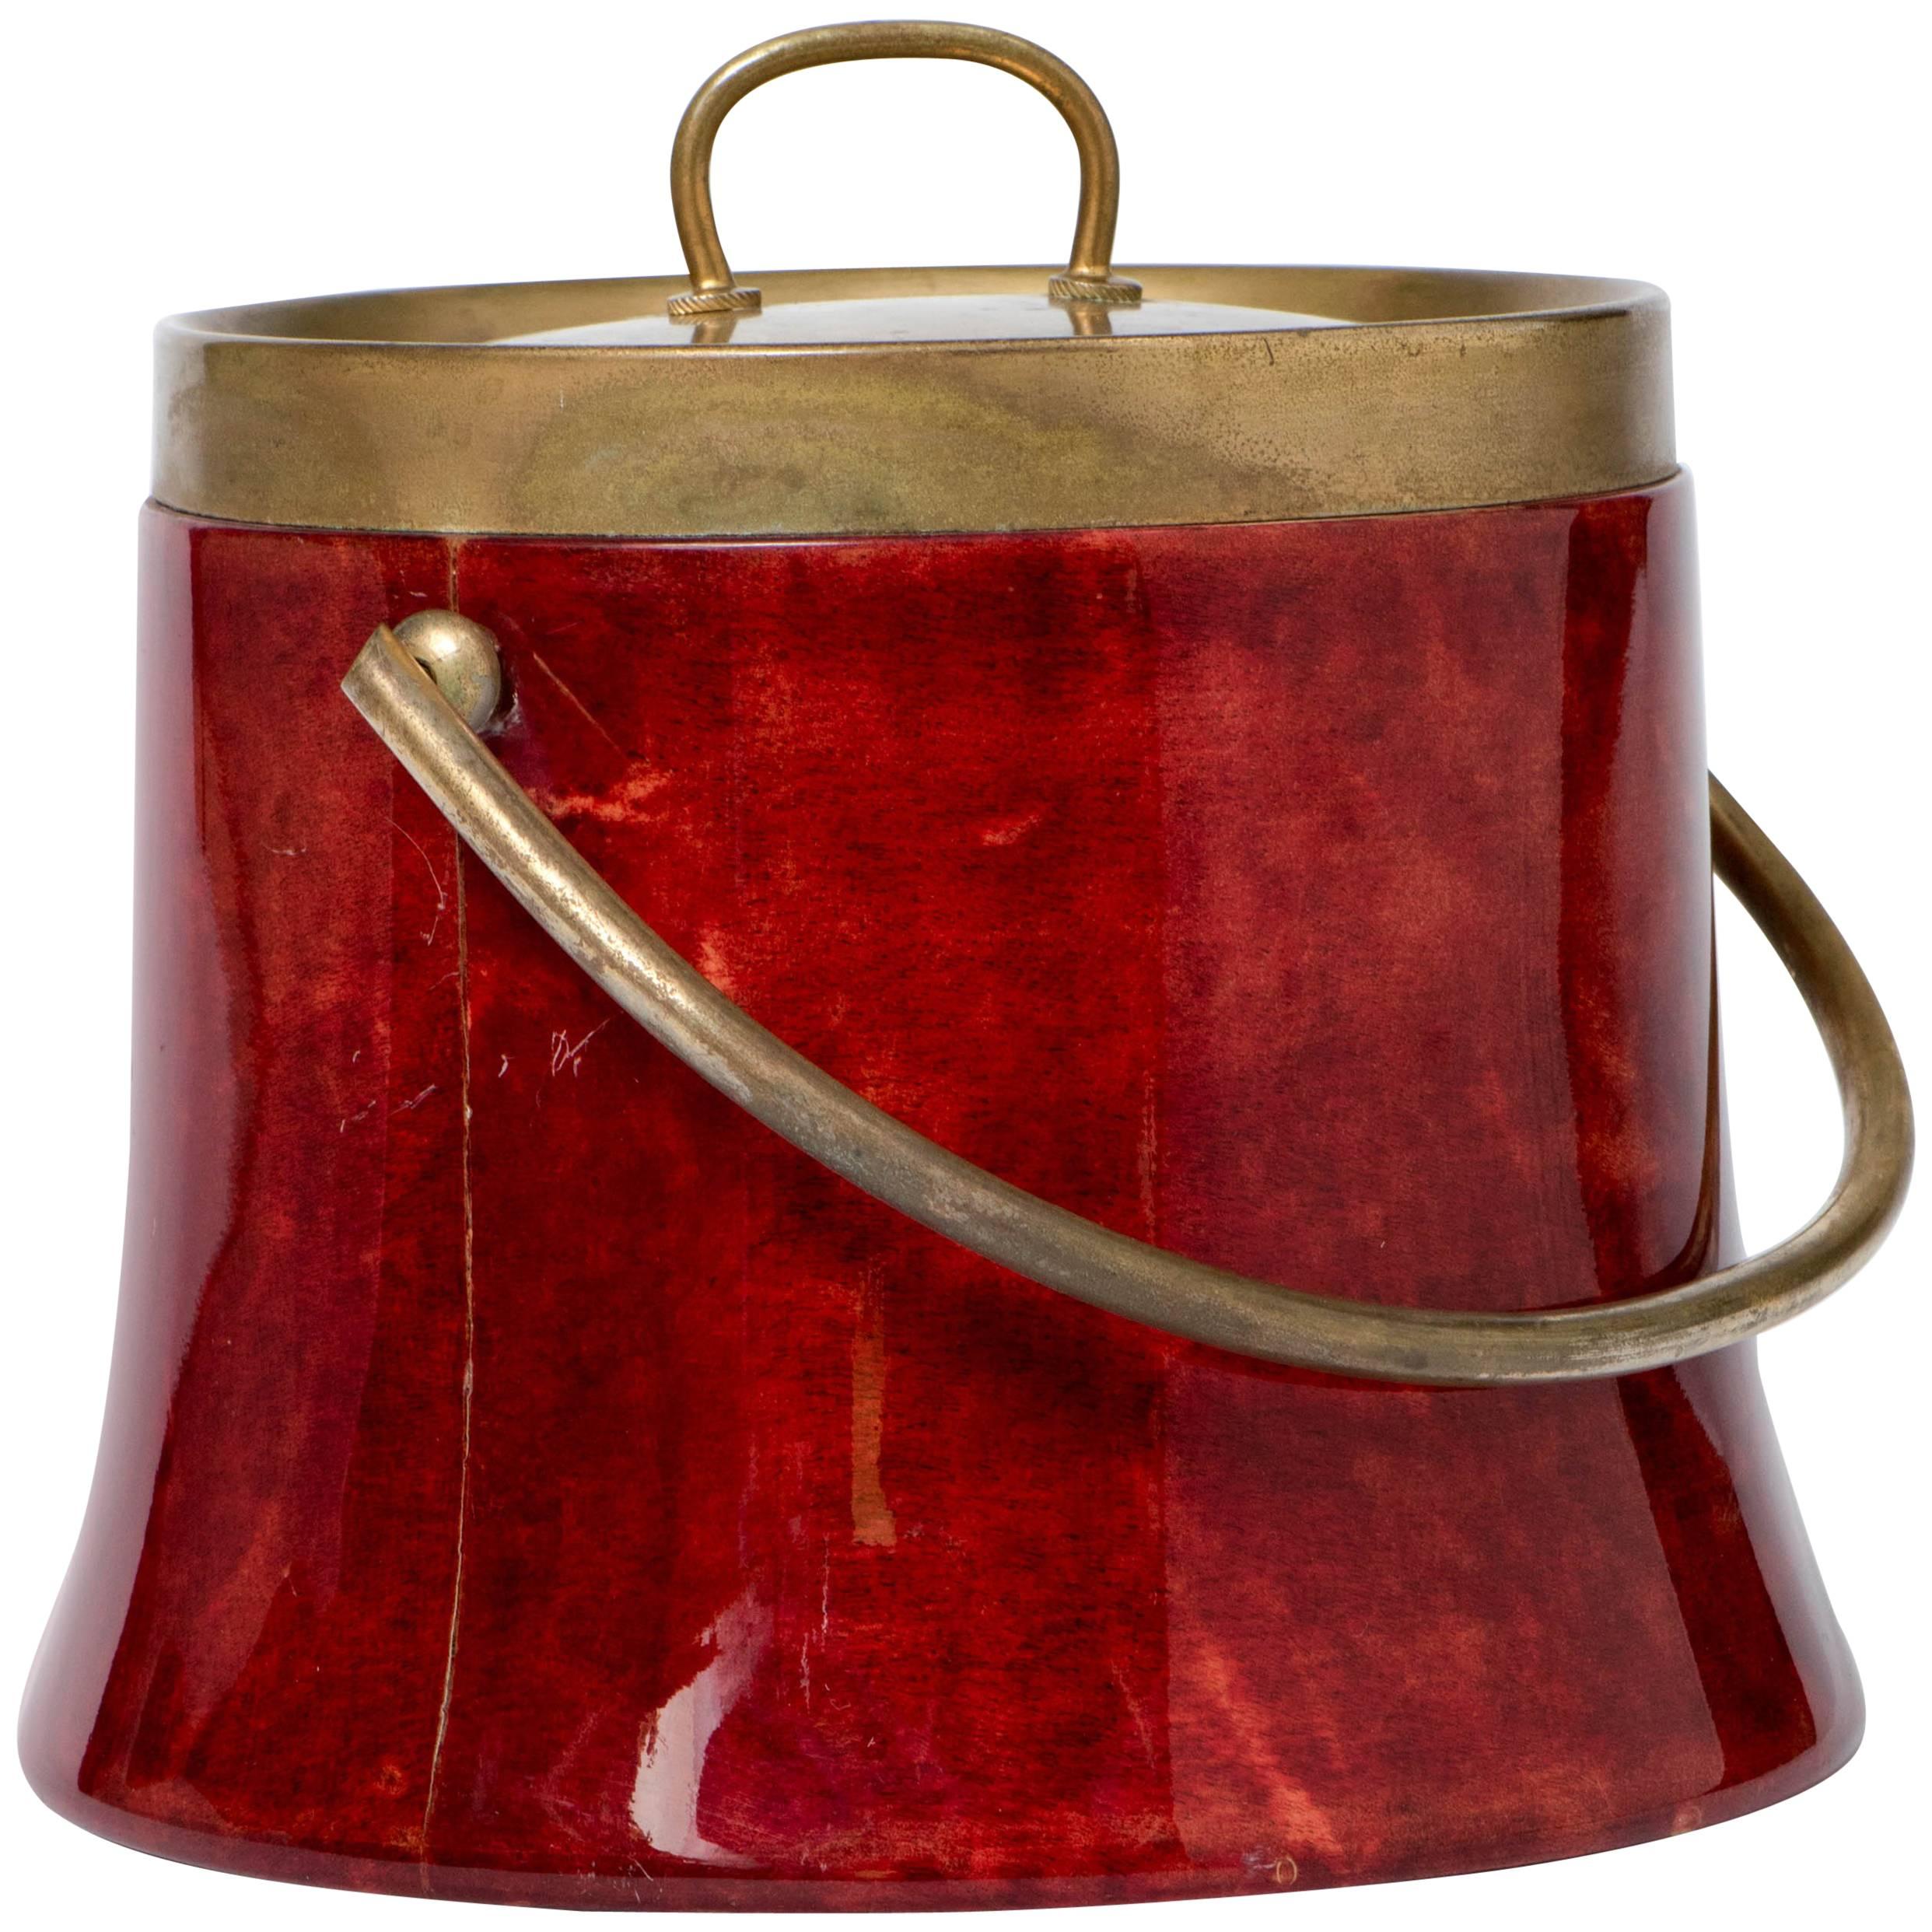 Aldo Tura ice bucket in red goat skin with brass mounts, Italy, circa 1950 For Sale